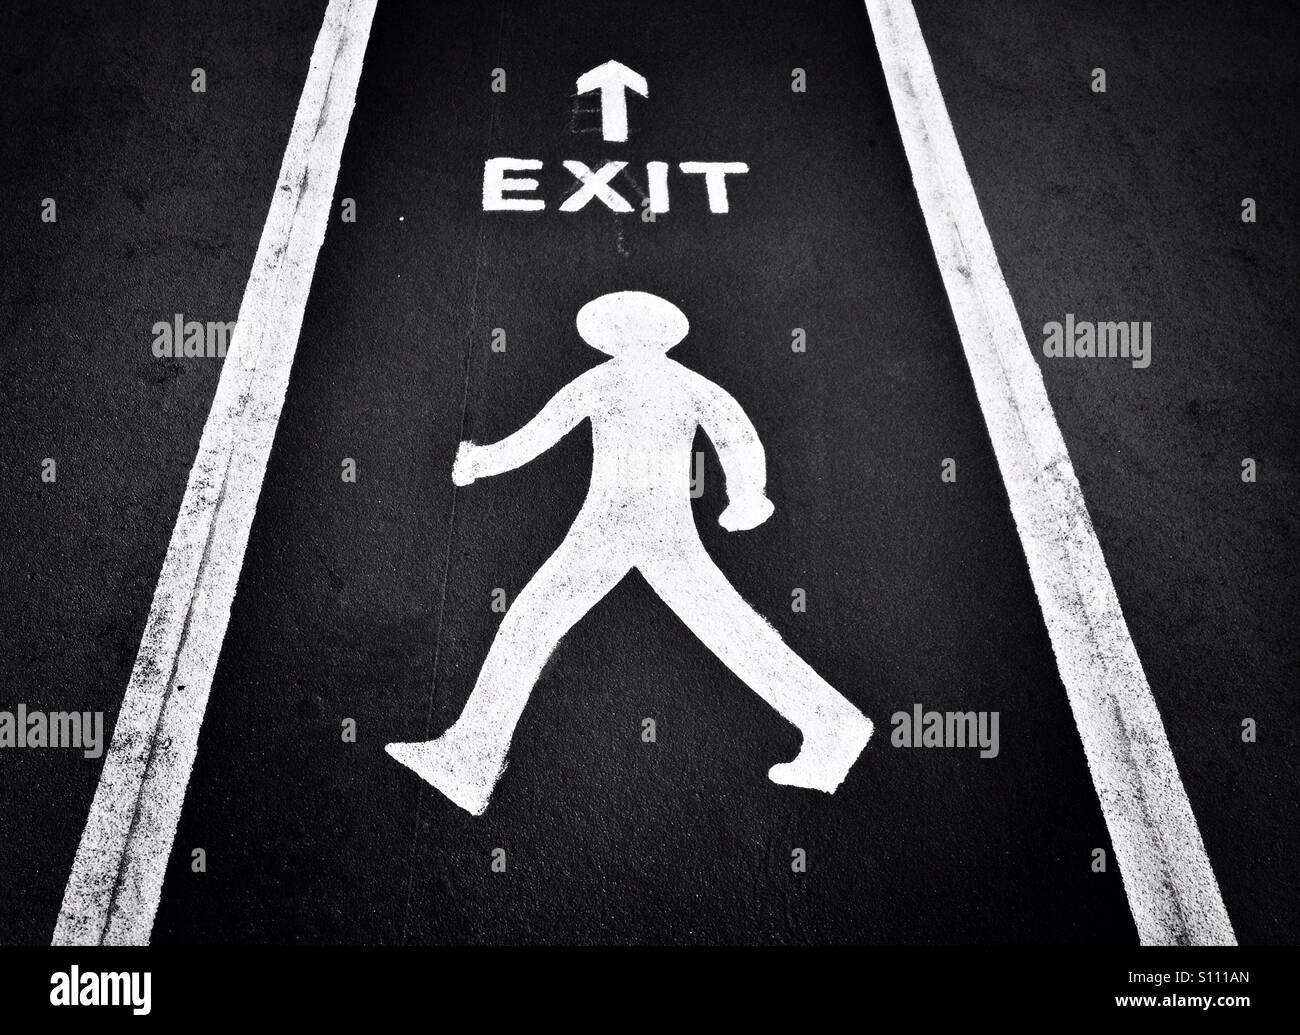 An exit sign showing a walking man painted on the concrete floor of a multi-storey car park Stock Photo